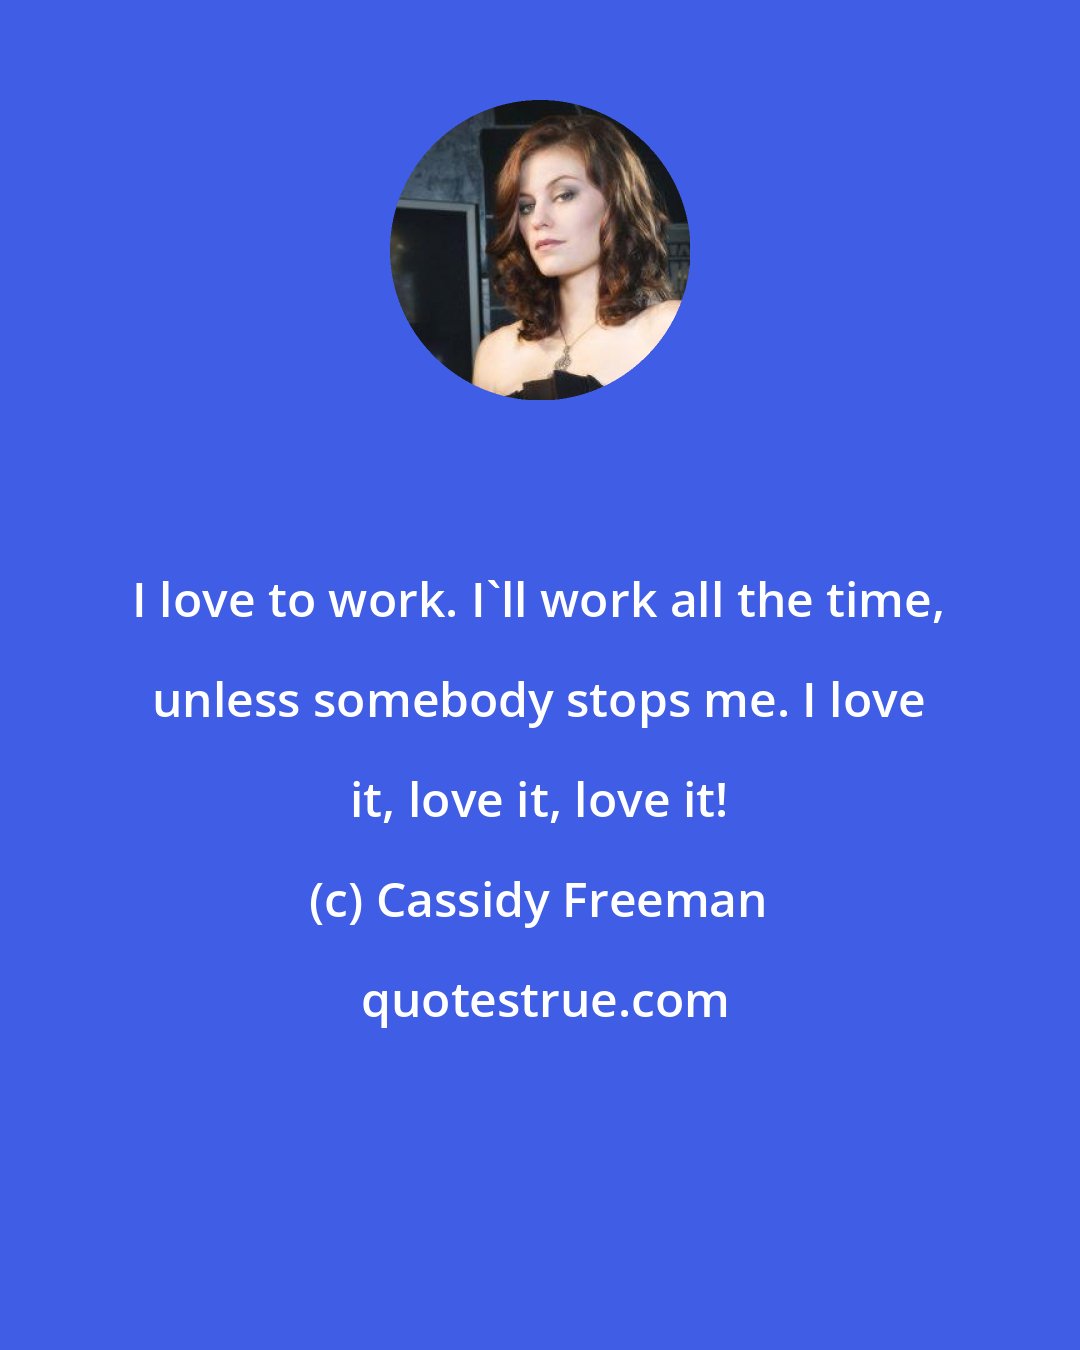 Cassidy Freeman: I love to work. I'll work all the time, unless somebody stops me. I love it, love it, love it!